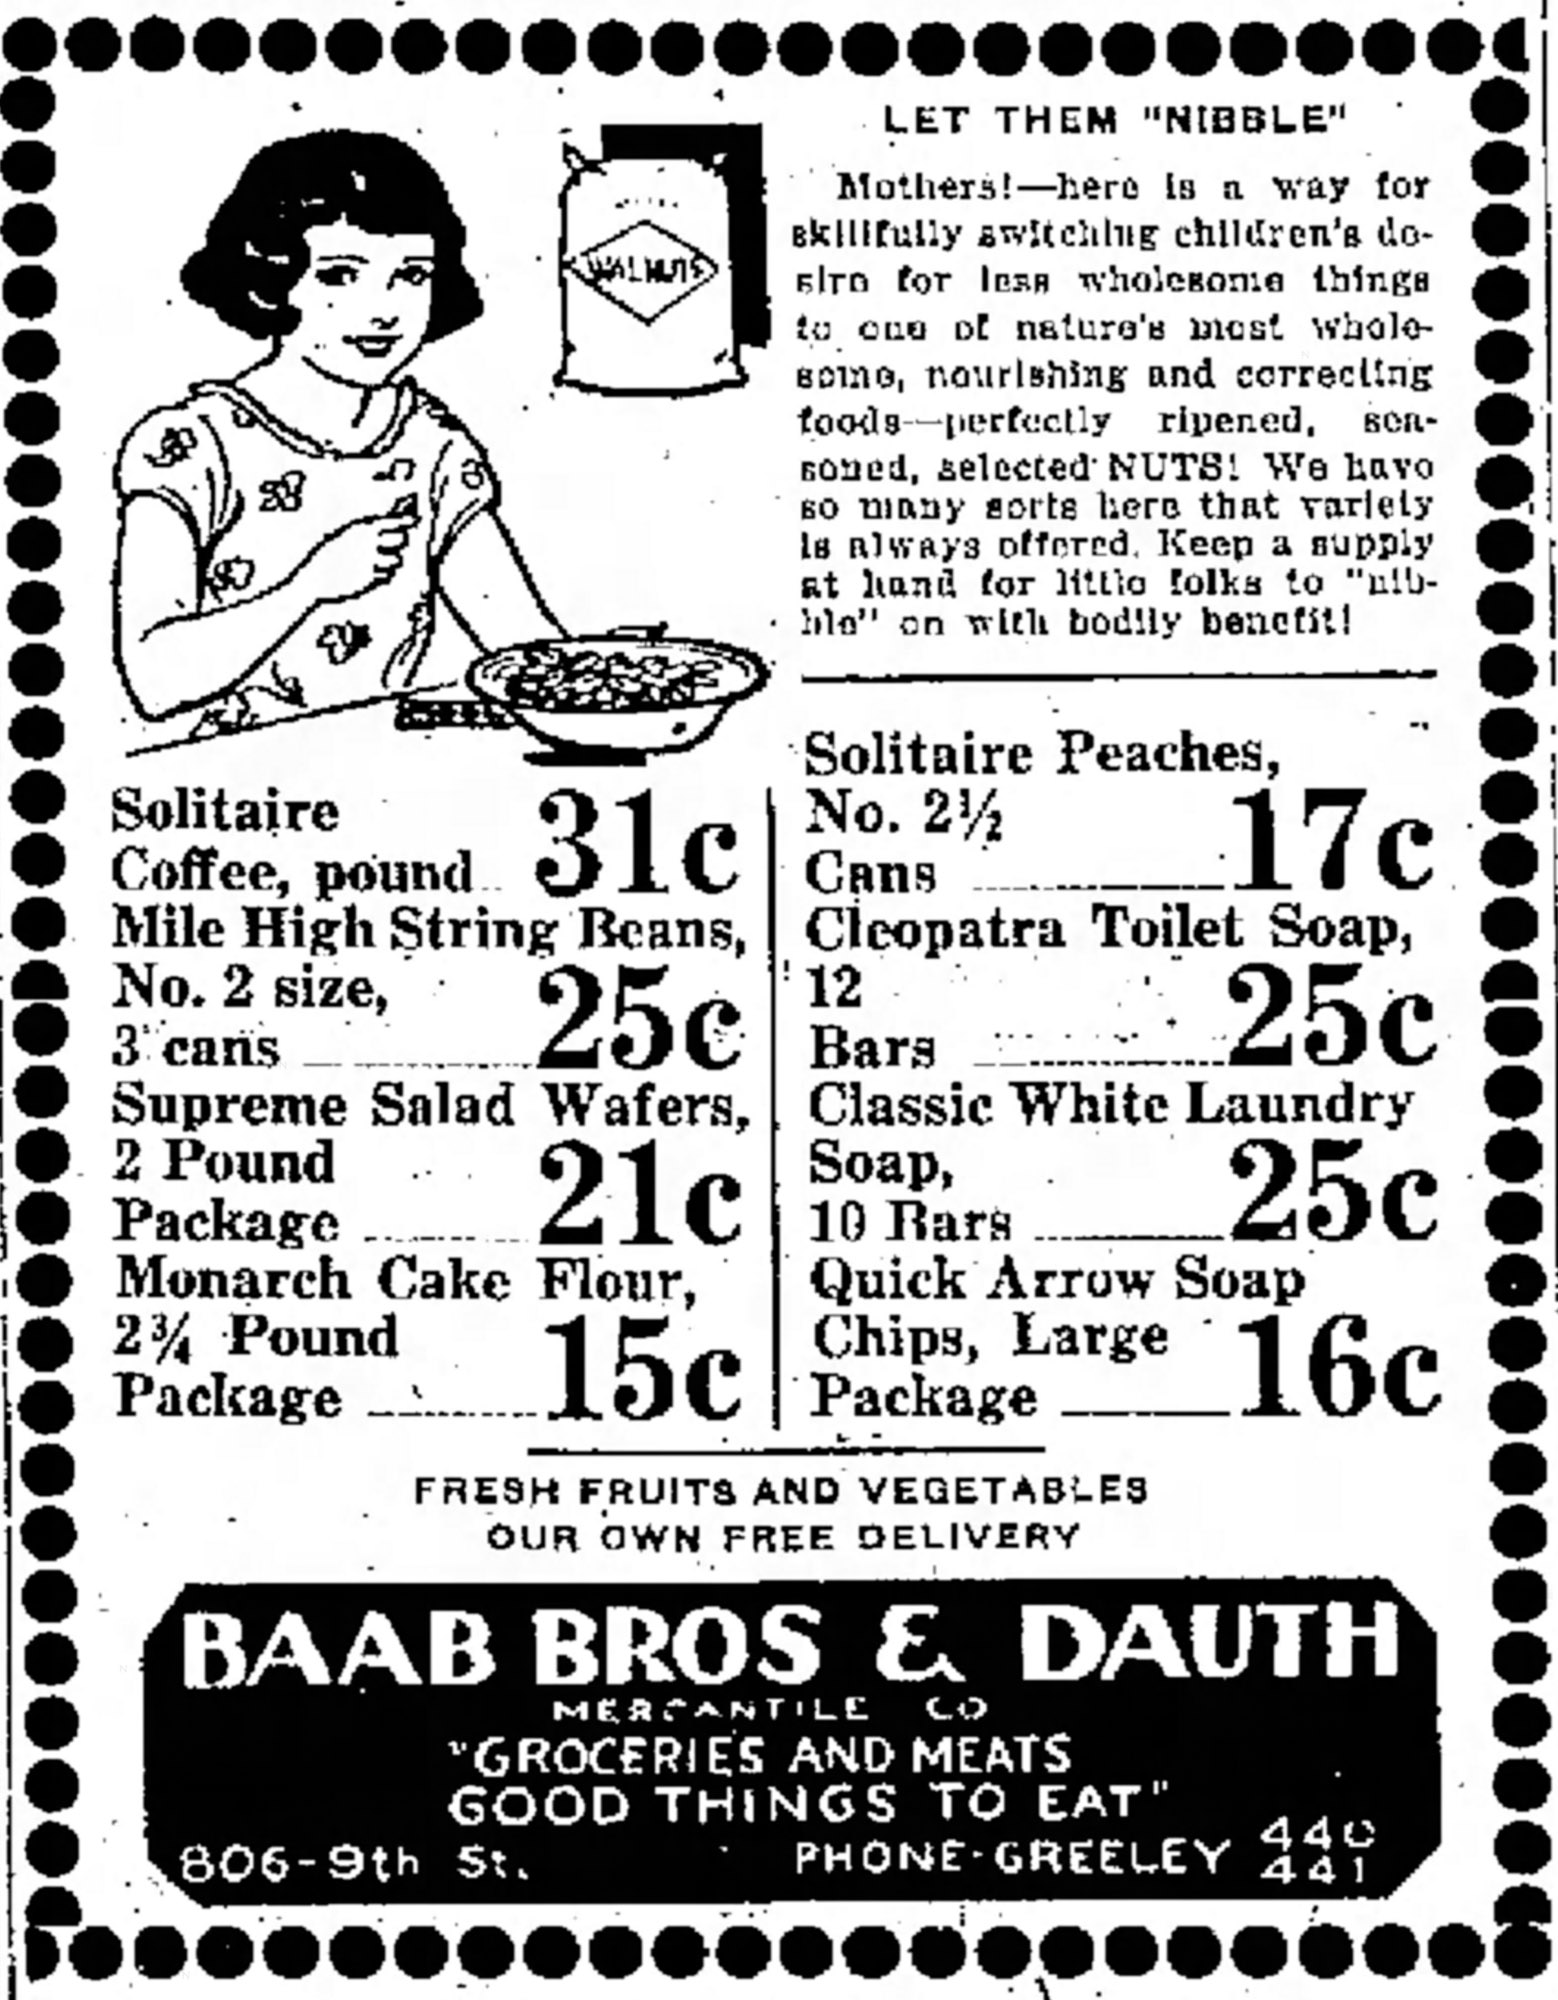 Dauth Family Archive - 1933-01-20 - Greeley Daily Tribune - Baab Bros and Dauth Advertisement